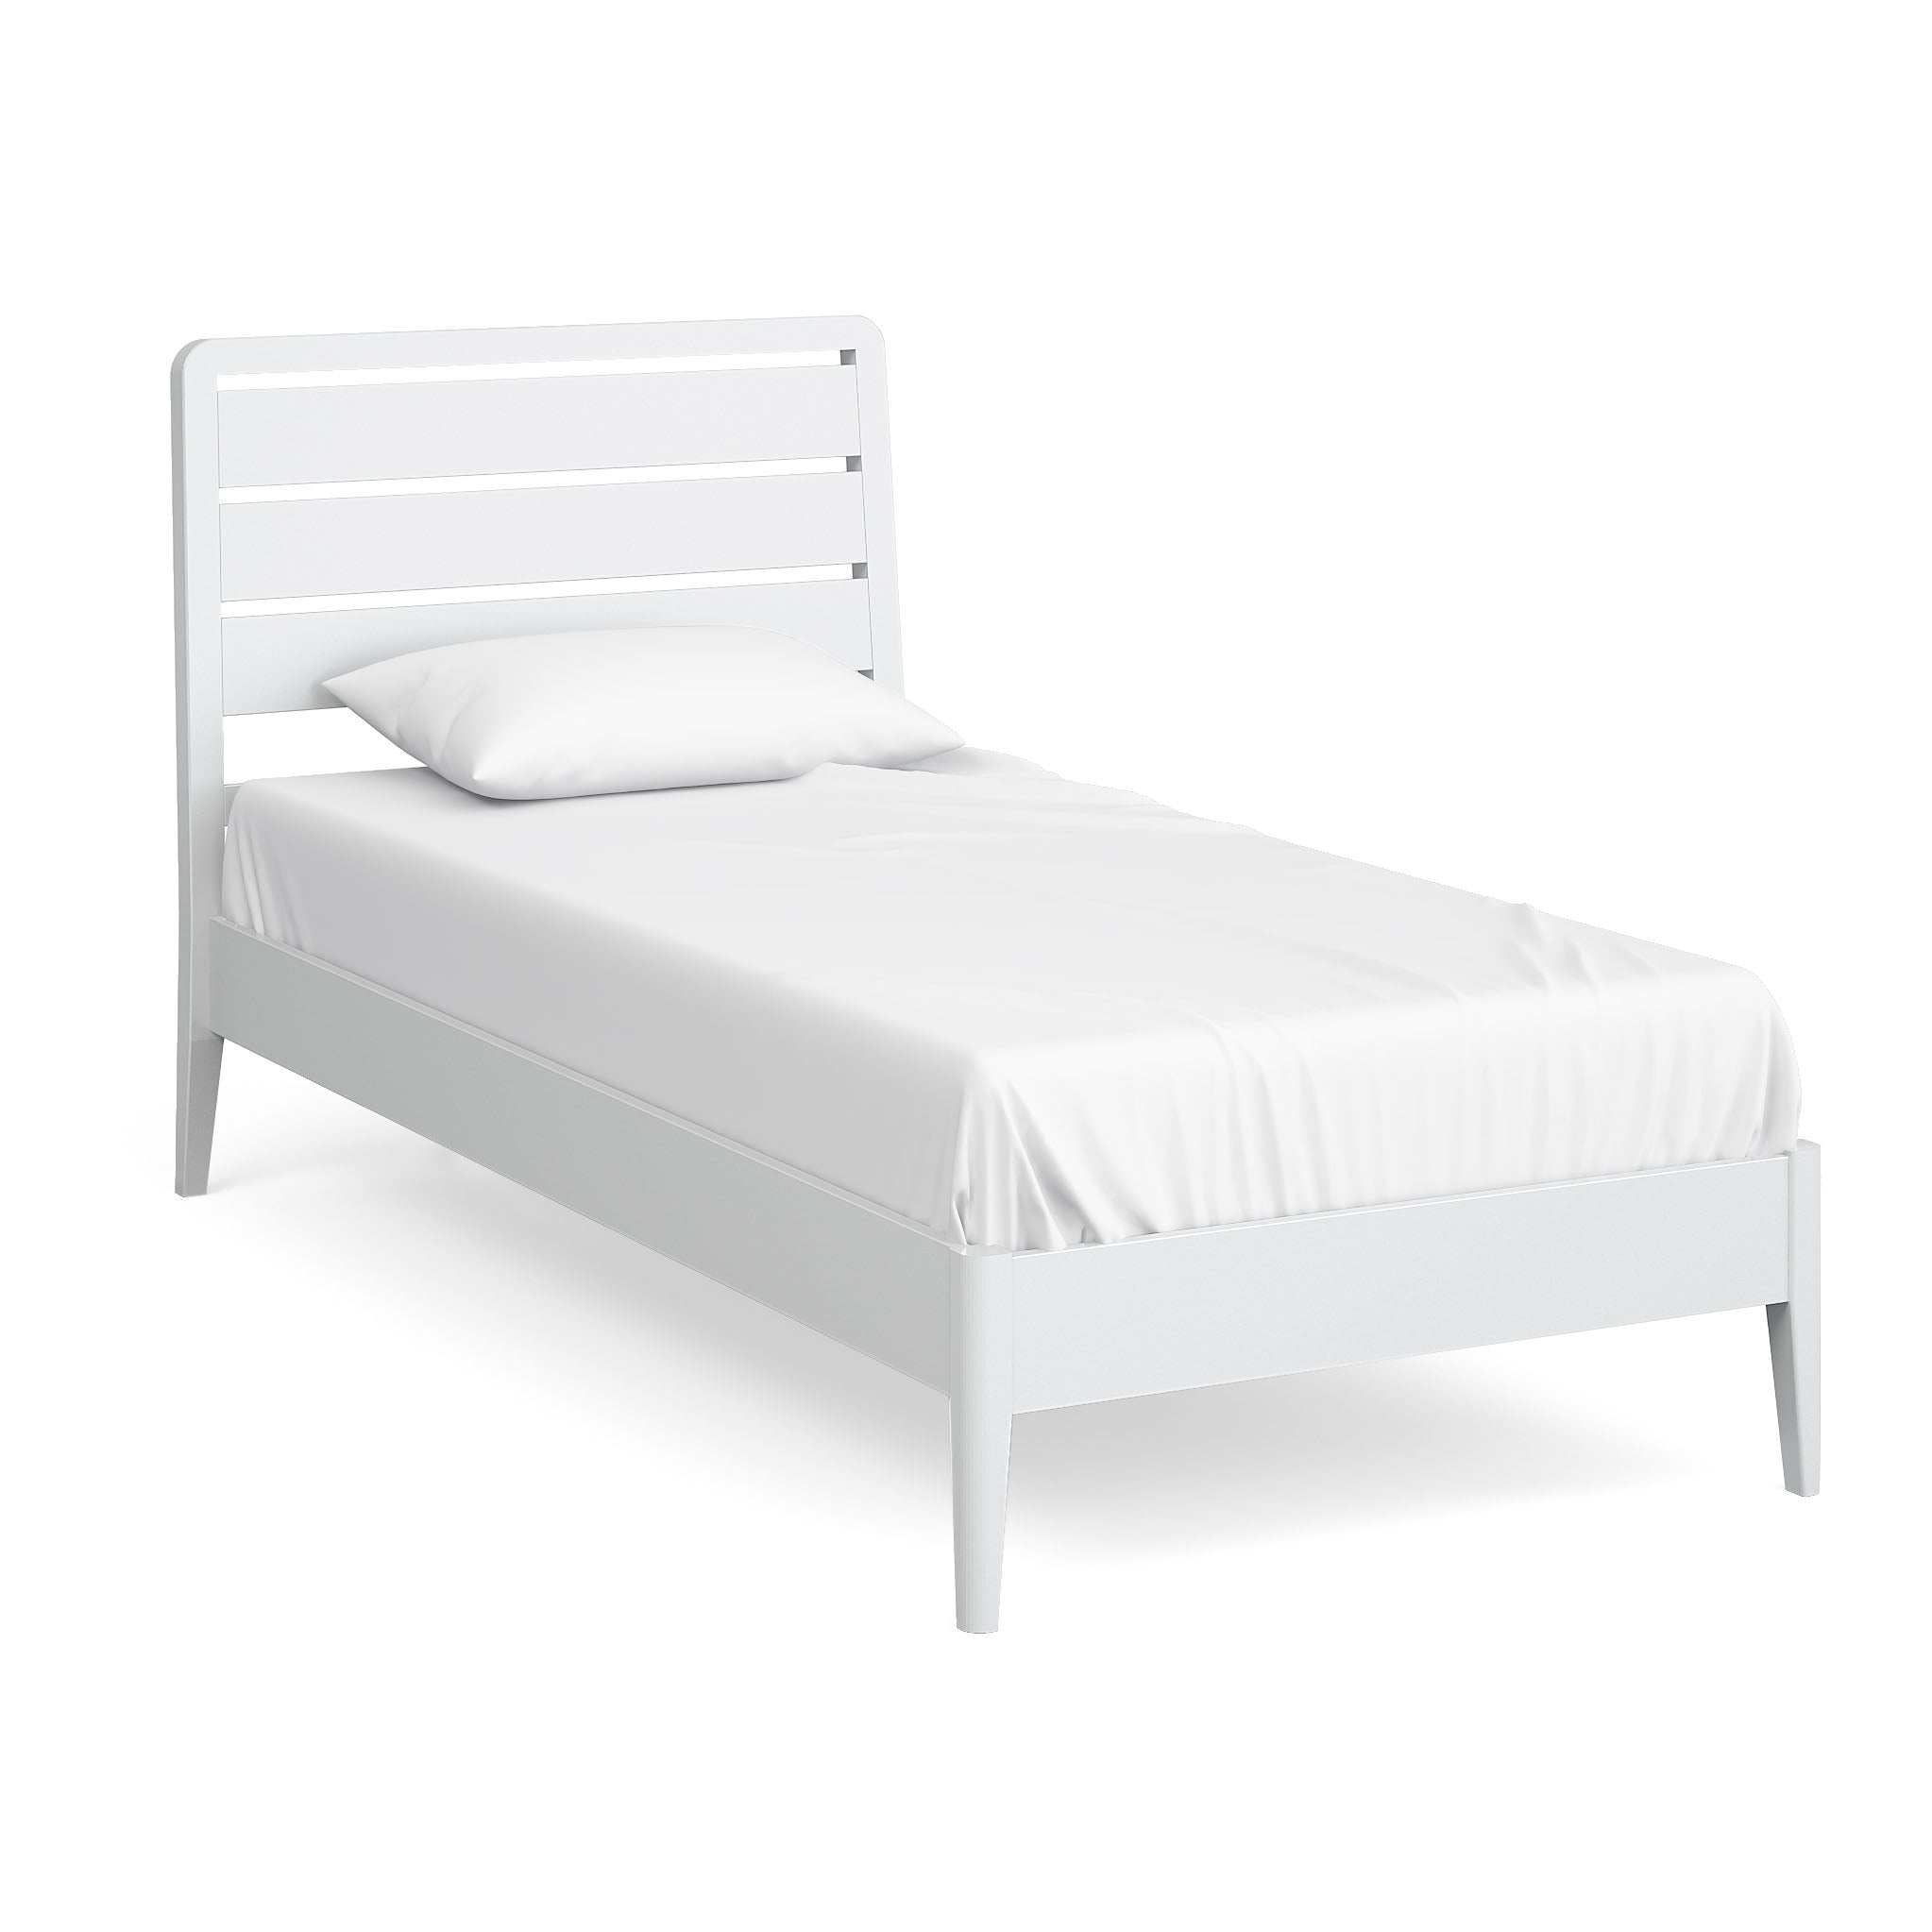 Chester White Painted Bed Frames 3ft Single 4ft6 Double 5ft King Size Contemporary Solid Wooden Frame